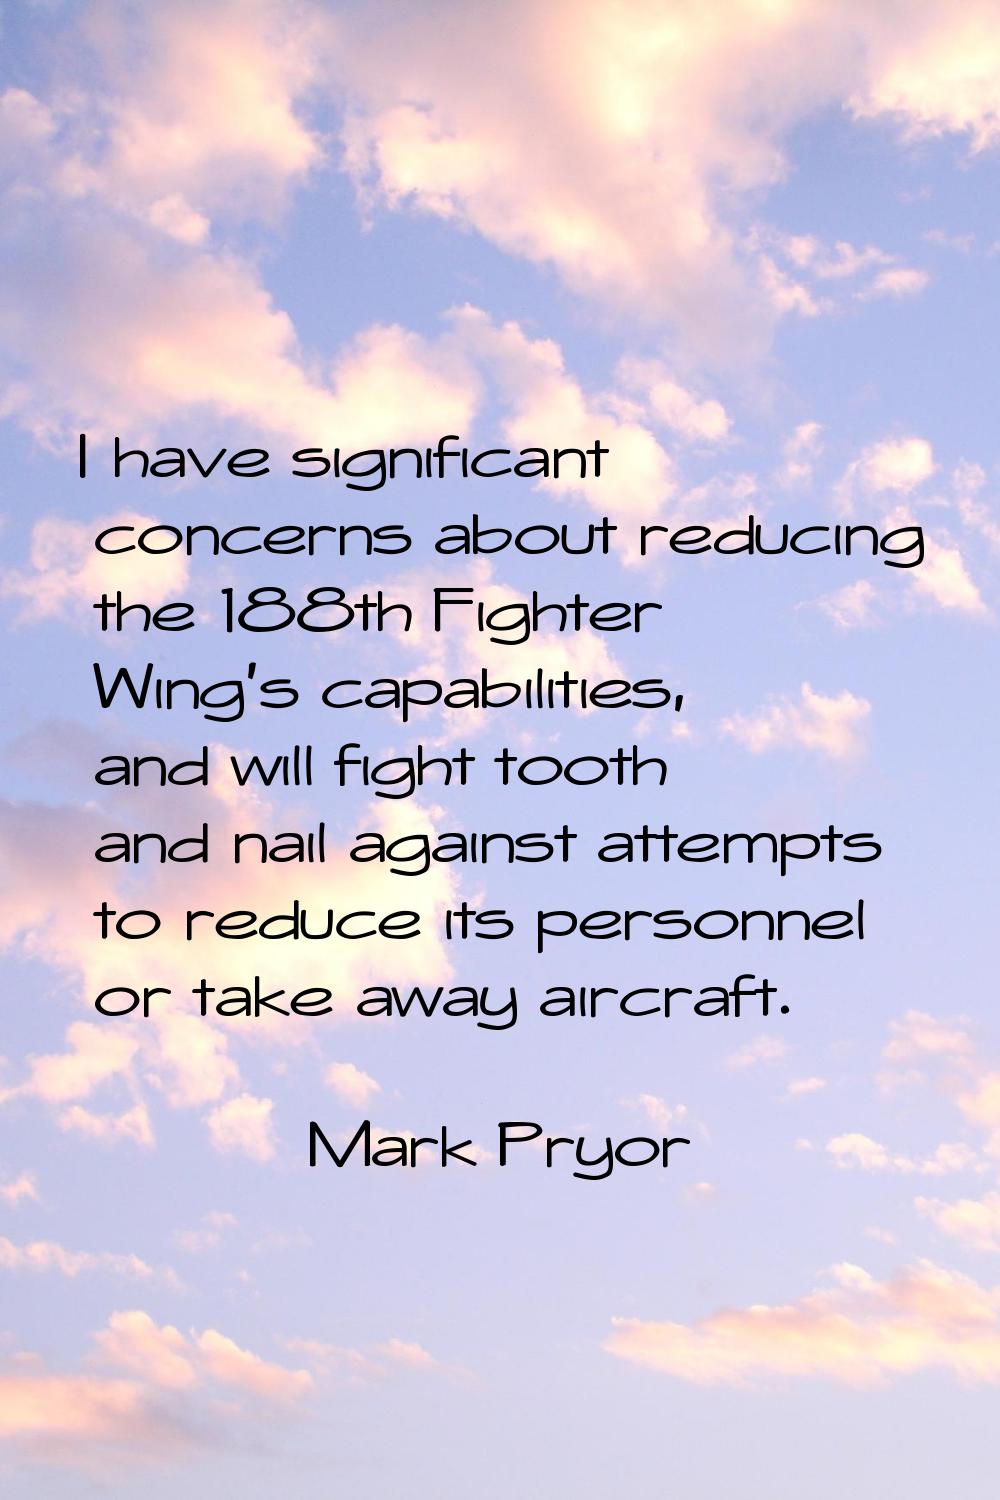 I have significant concerns about reducing the 188th Fighter Wing's capabilities, and will fight to